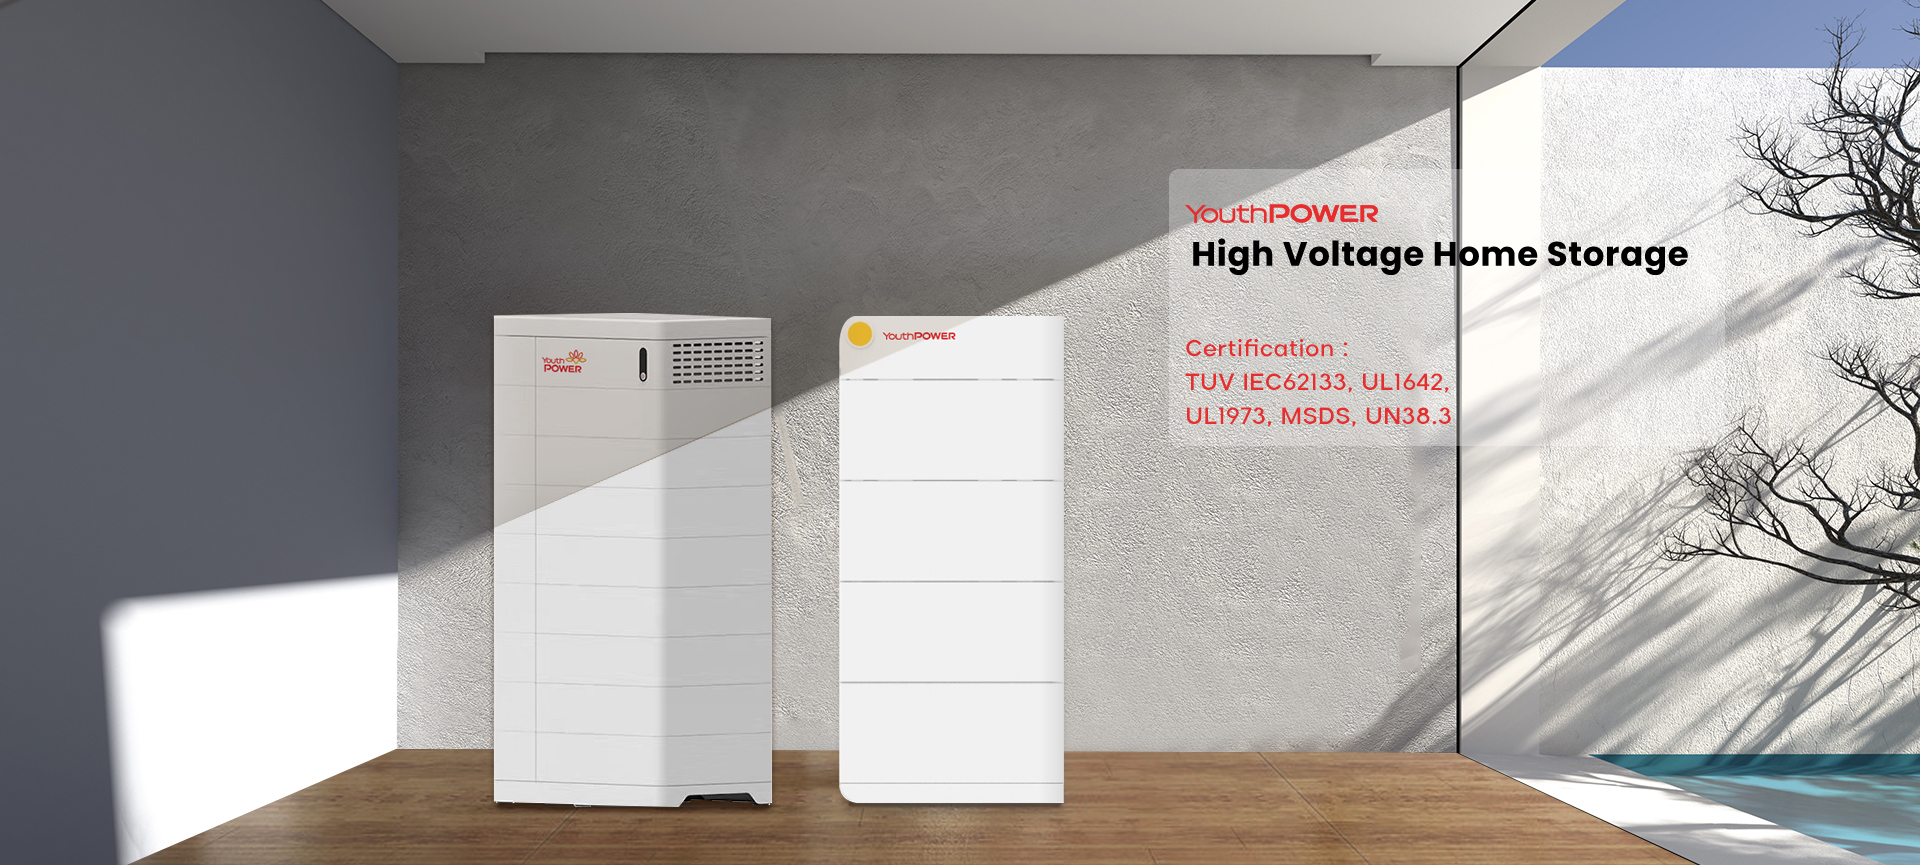 YouthPOWER High Voltage Home Storage